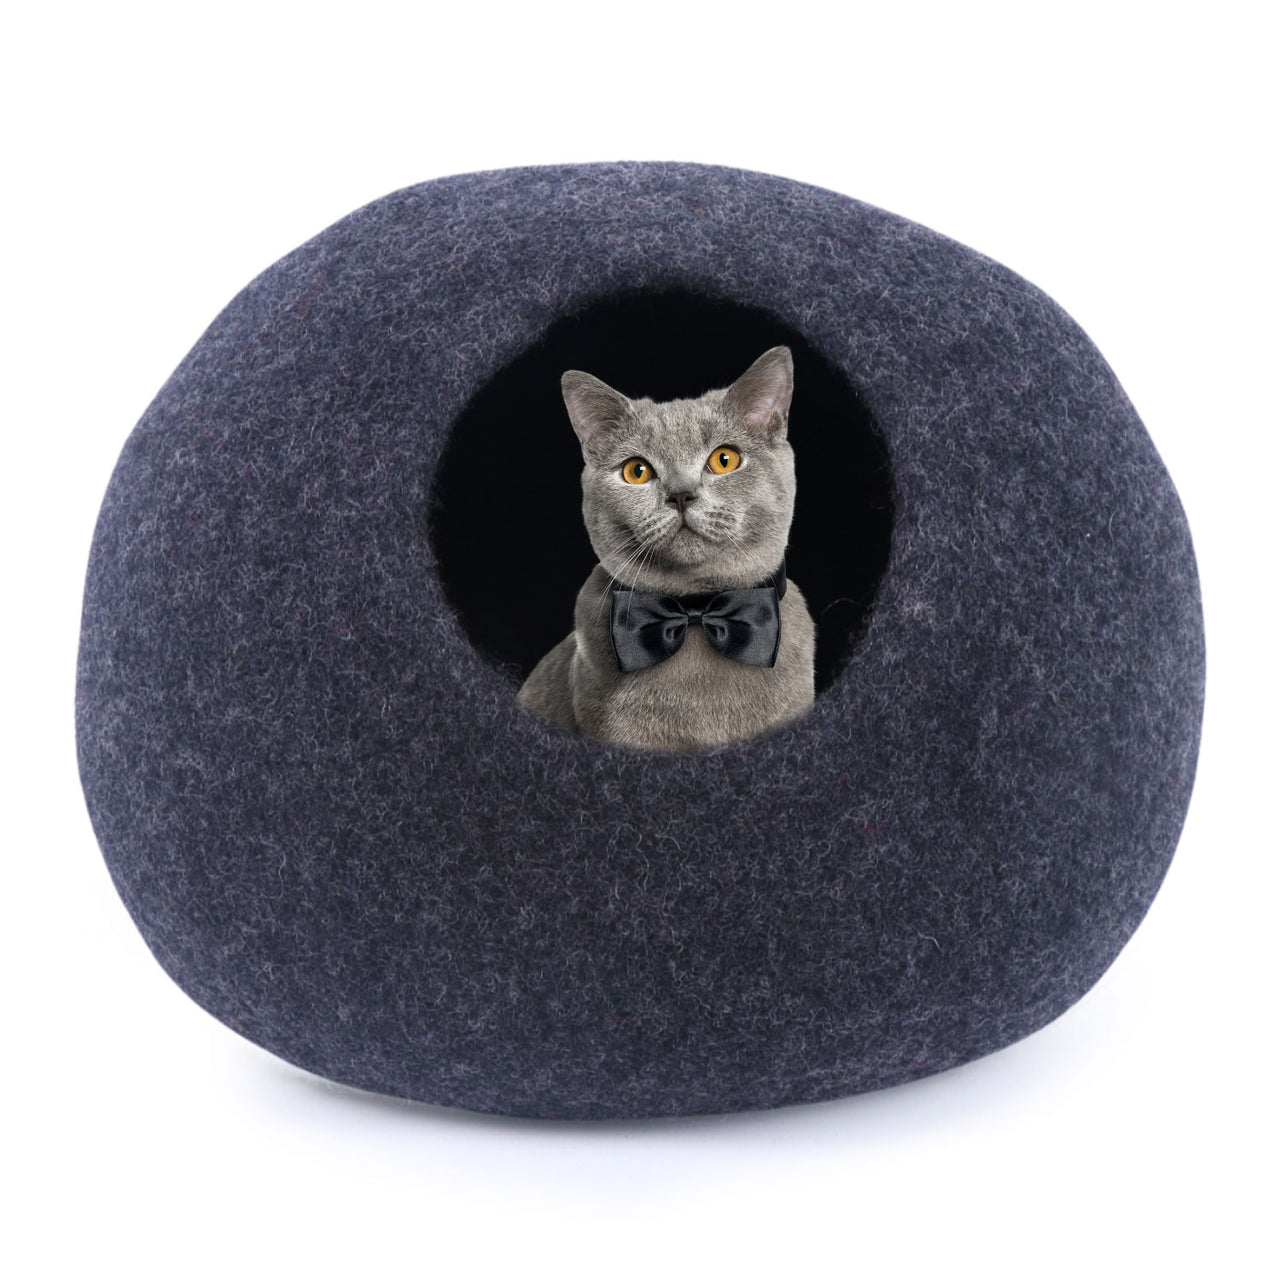 Felt cat cave, Hand Made Cat Cave from Nepal, Felted Wool Cat Cave Bed